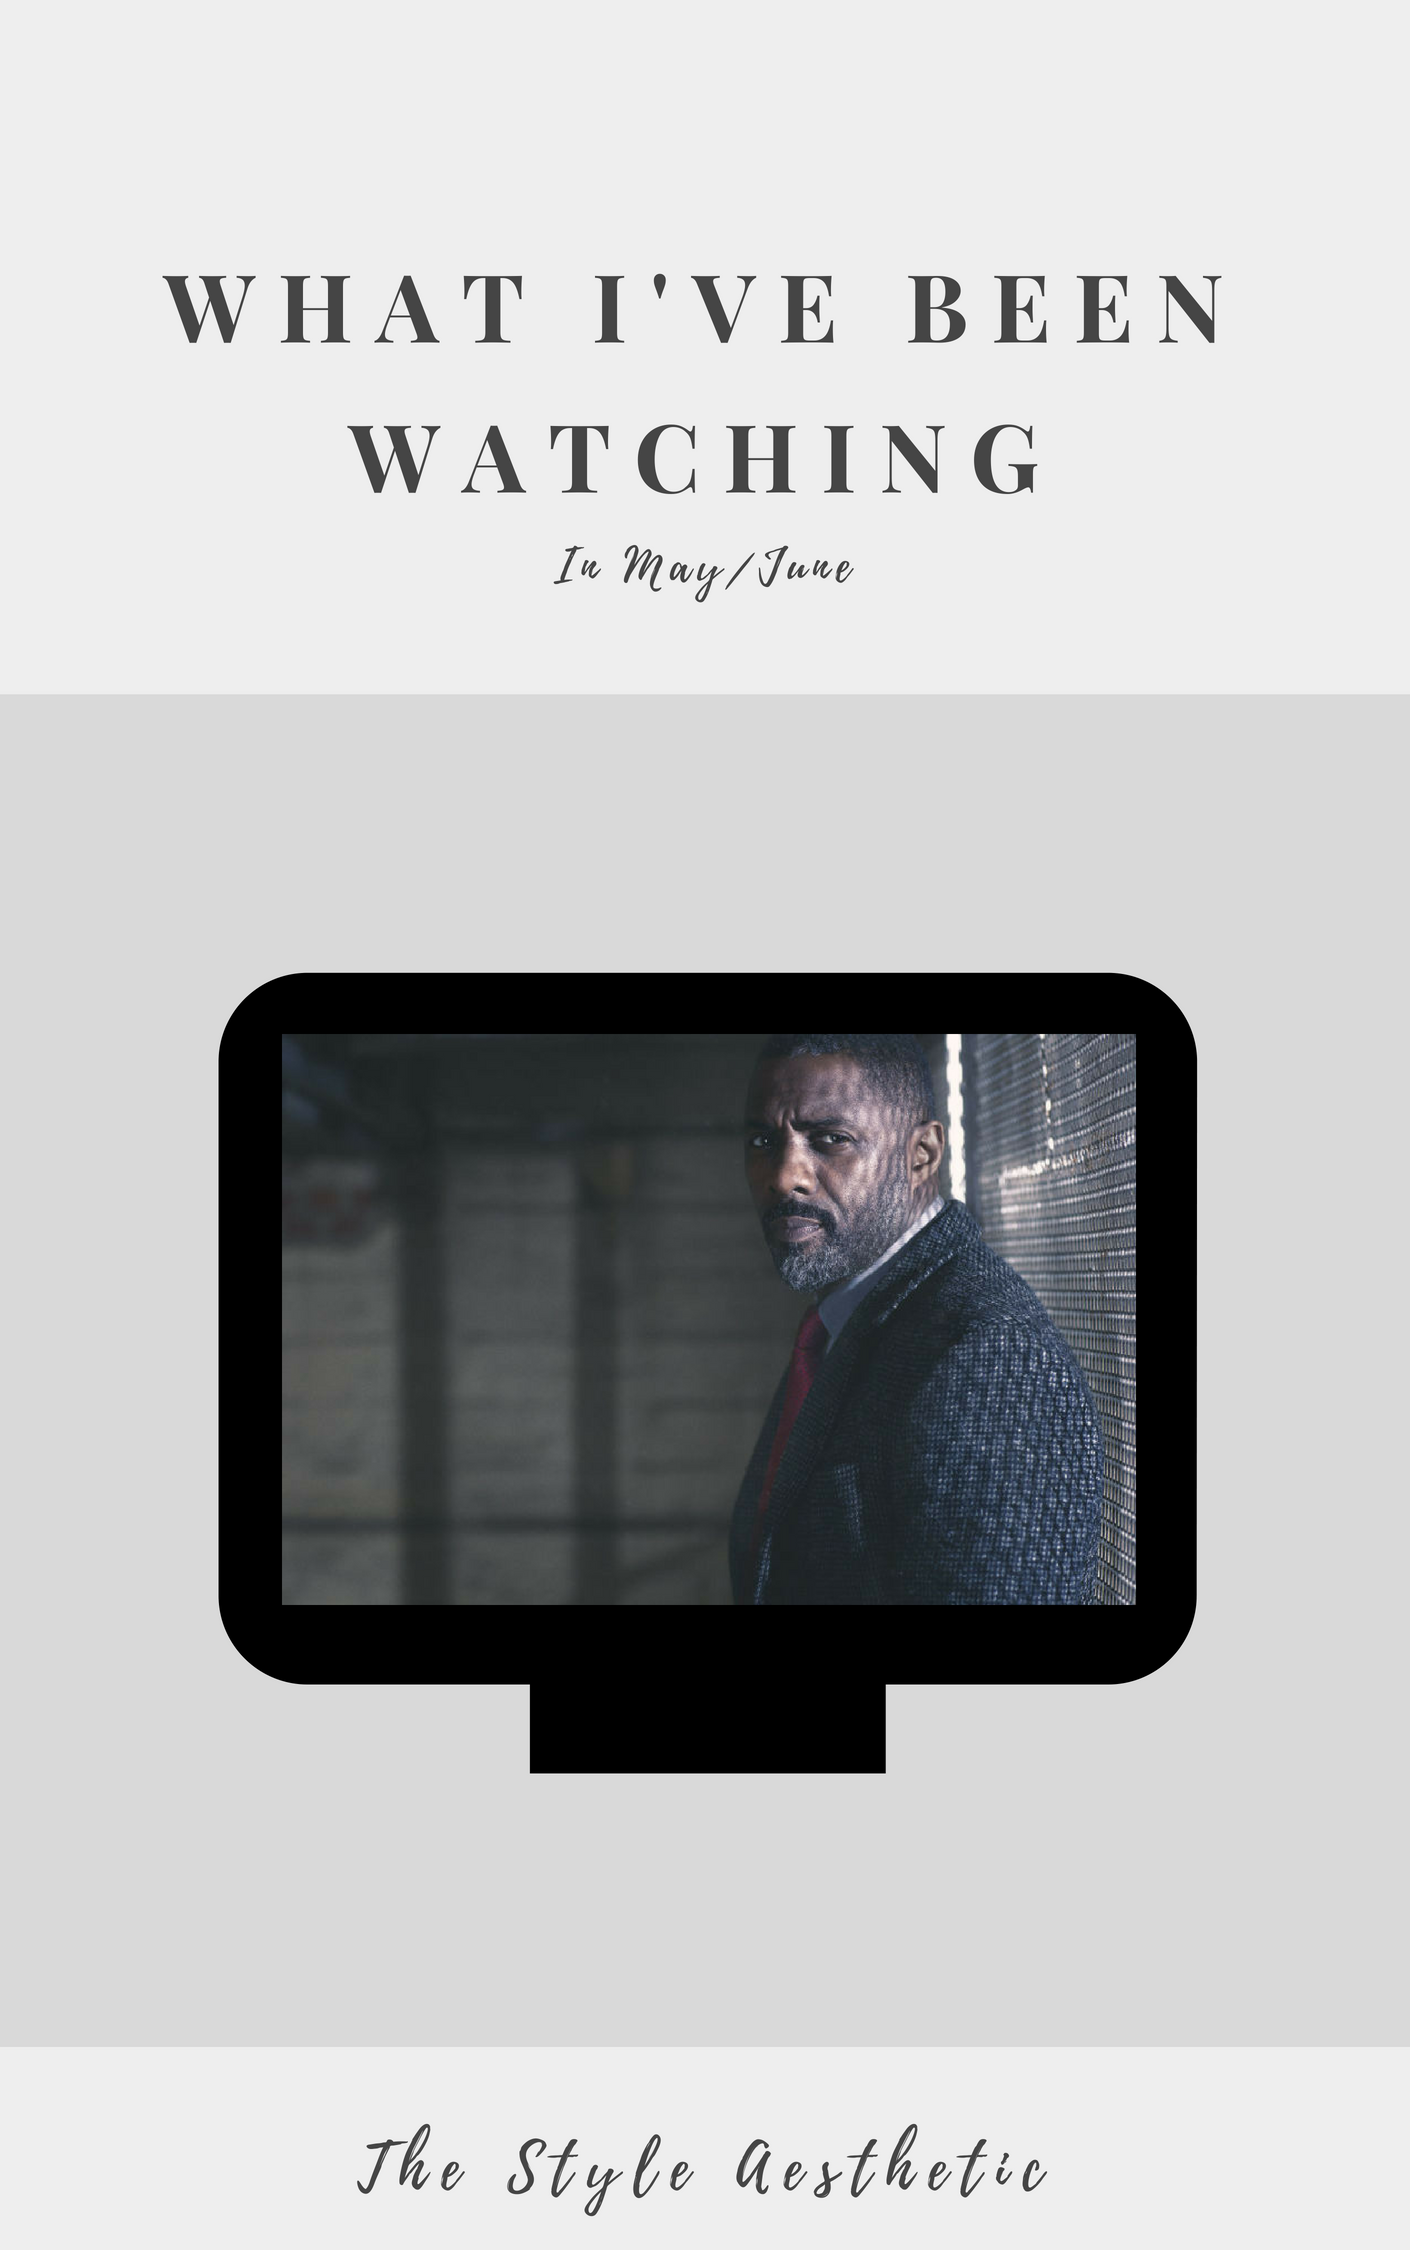 What I've Been Watching on TV | Luther | The Style Aesthetic Lifestyle Blog